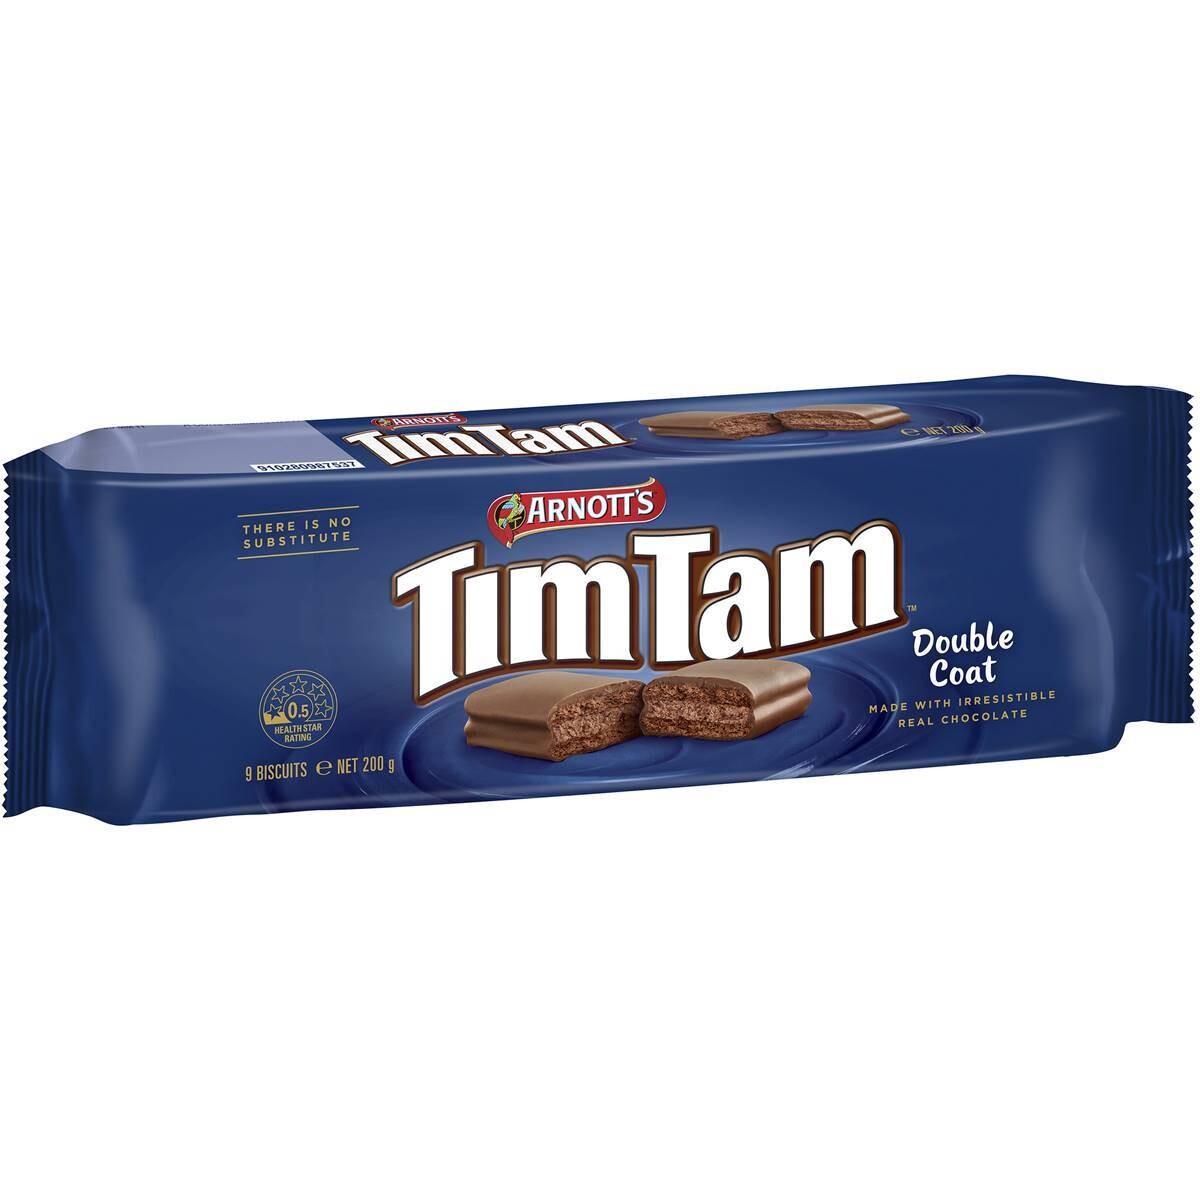 Arnott's Australia Tim Tam Double Coat Made With Irresistible Real Chocolate Biscuits 200g (Imported)